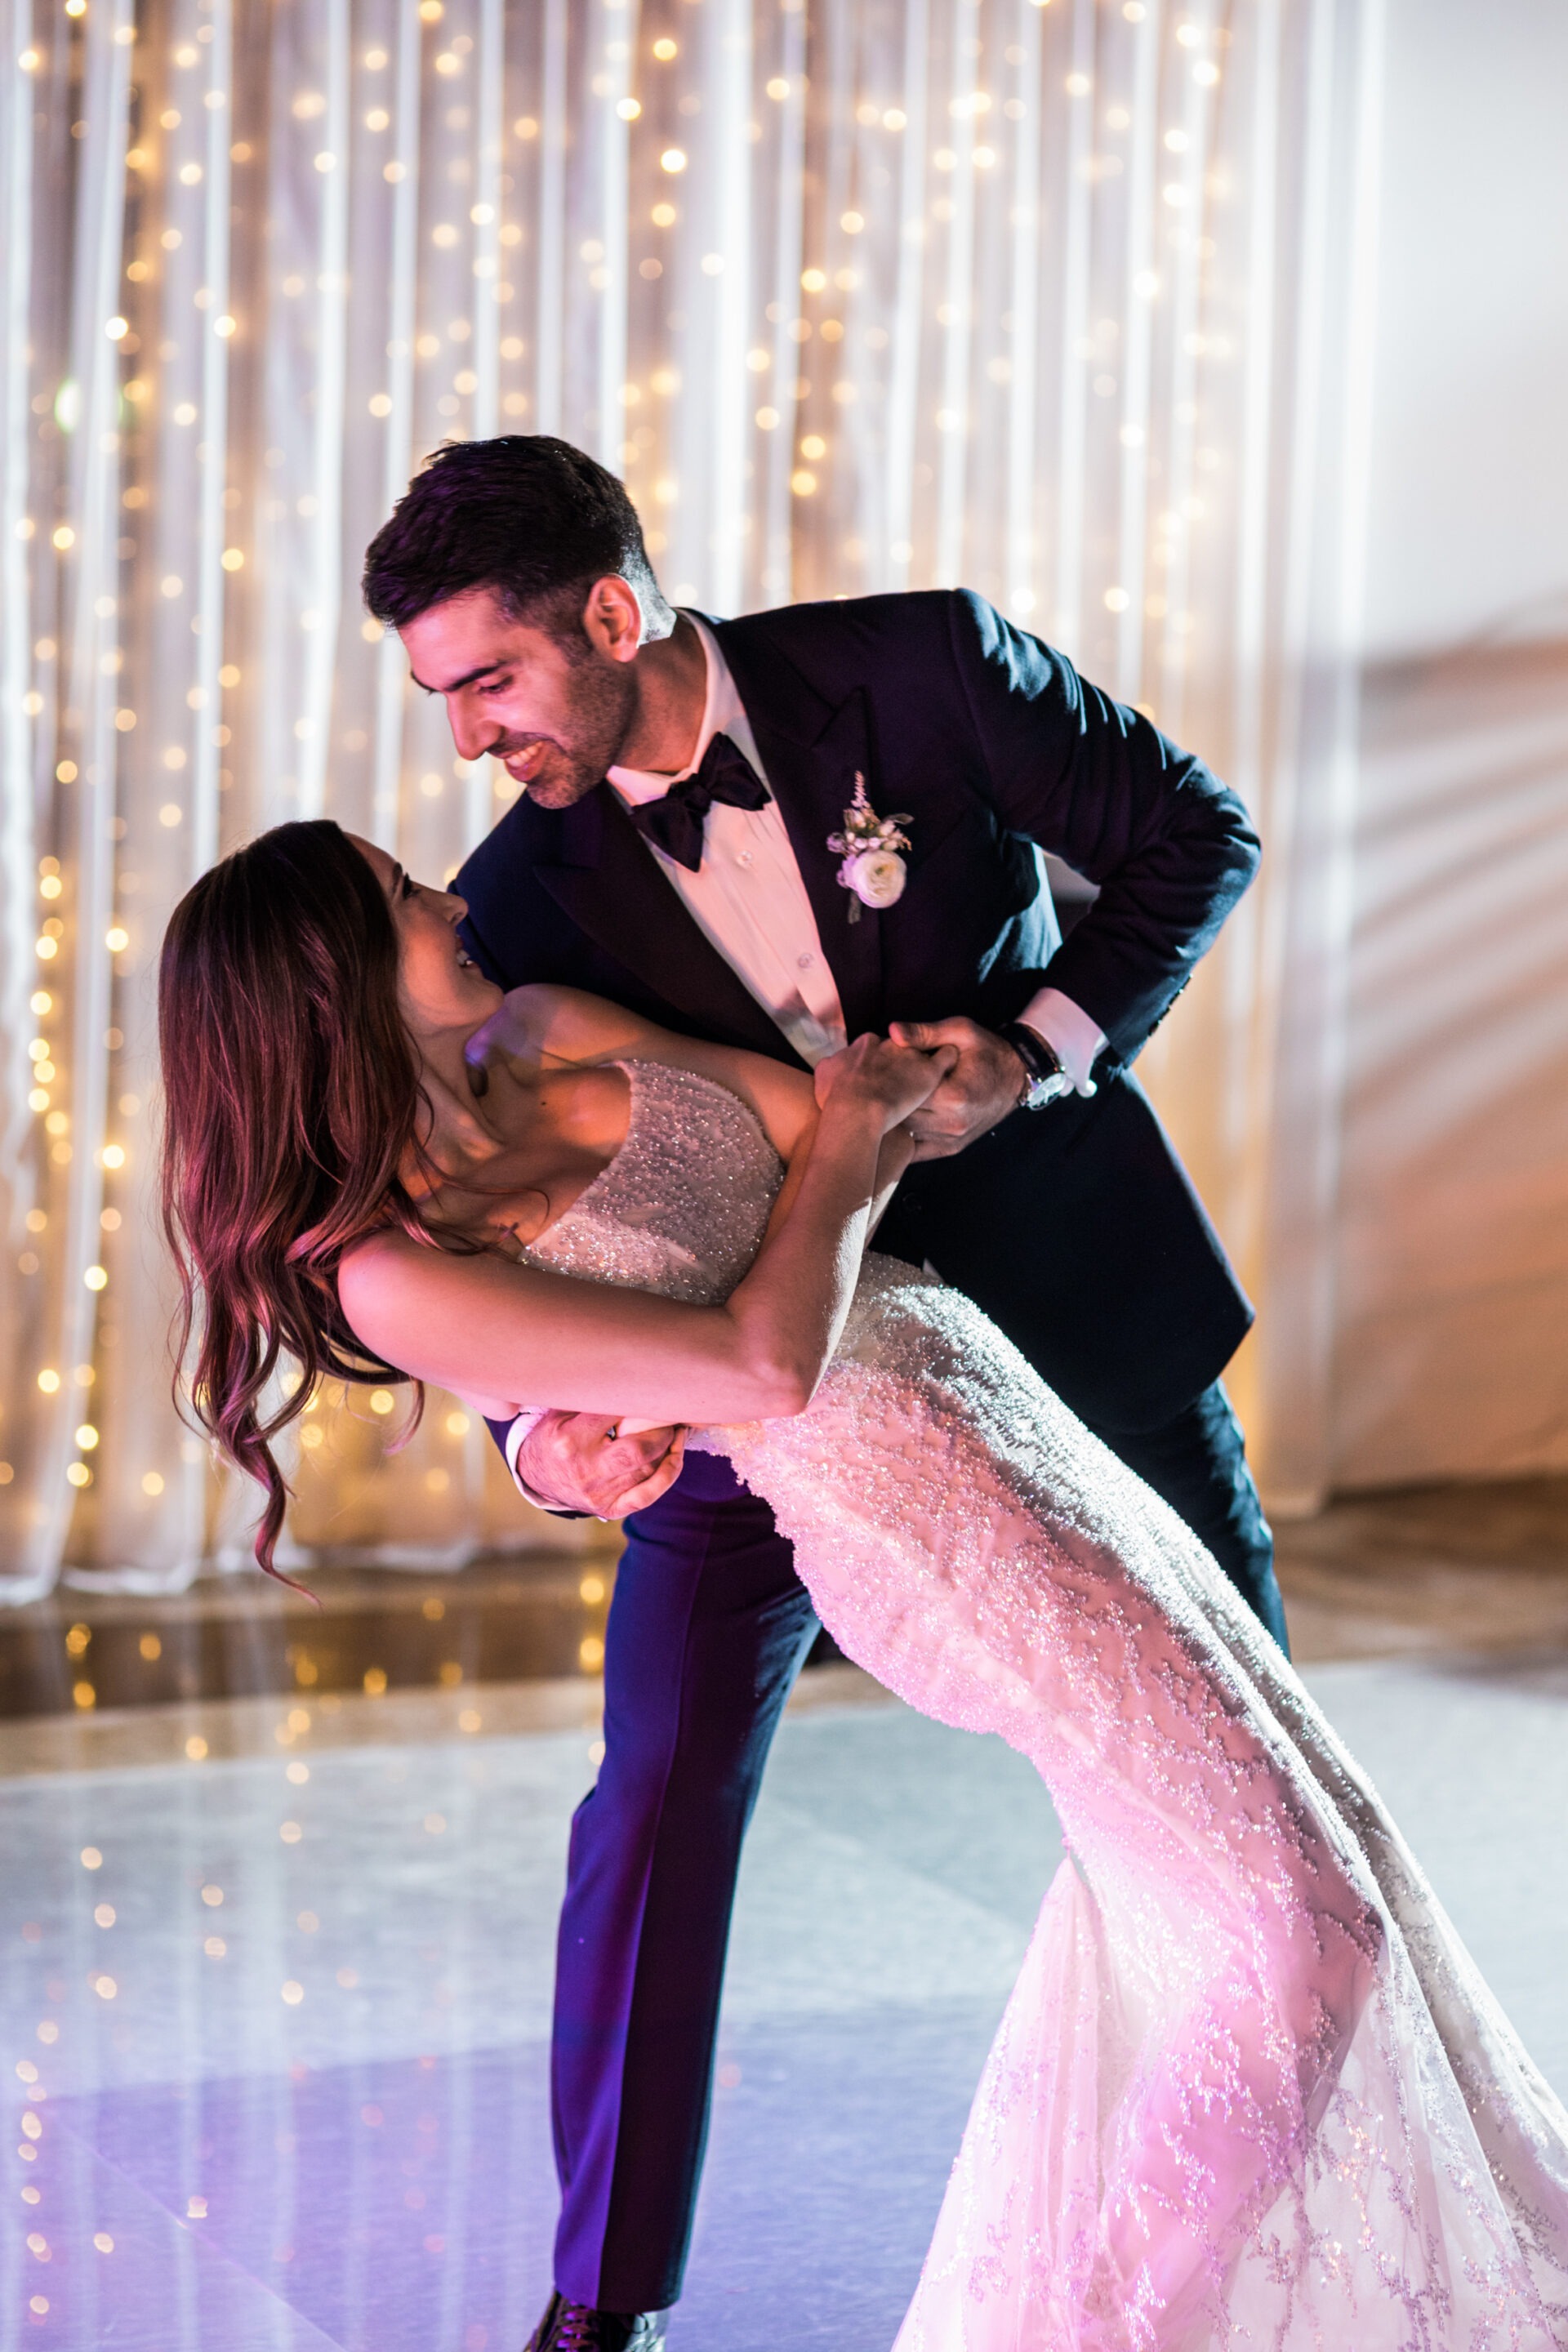 California DJ services can make any wedding an even more joyous event. A groom dips his bride on the dance floor with a curtain of twinkle lights in the background. 